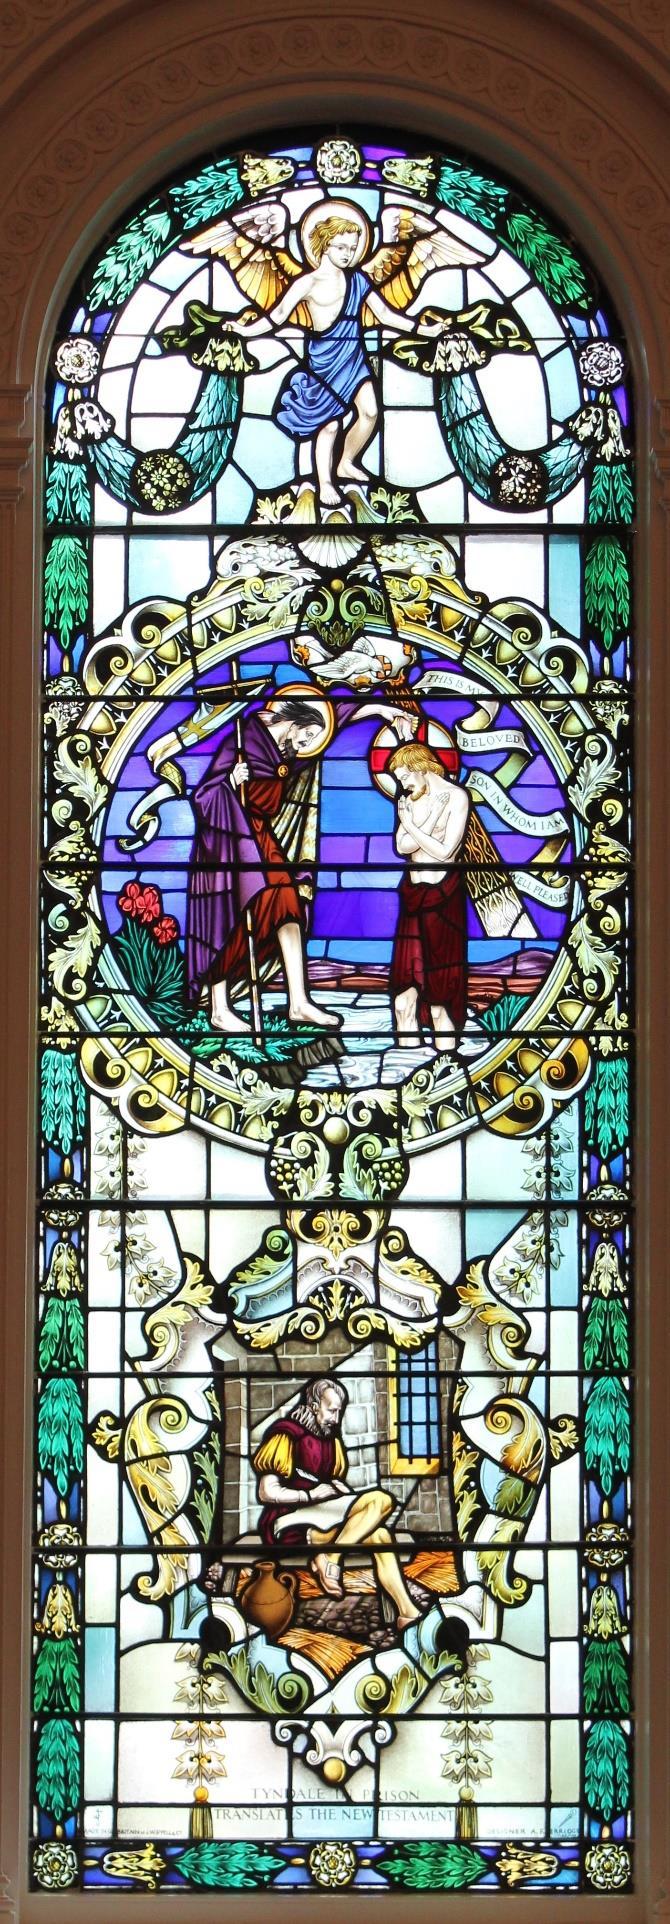 (Last Window on left side facing Chancel) Upper Medallion: The Baptism of Jesus Matthew 3:16-17 Lower Medallion: William Tyndale Translating the New Testament from Greek to English.